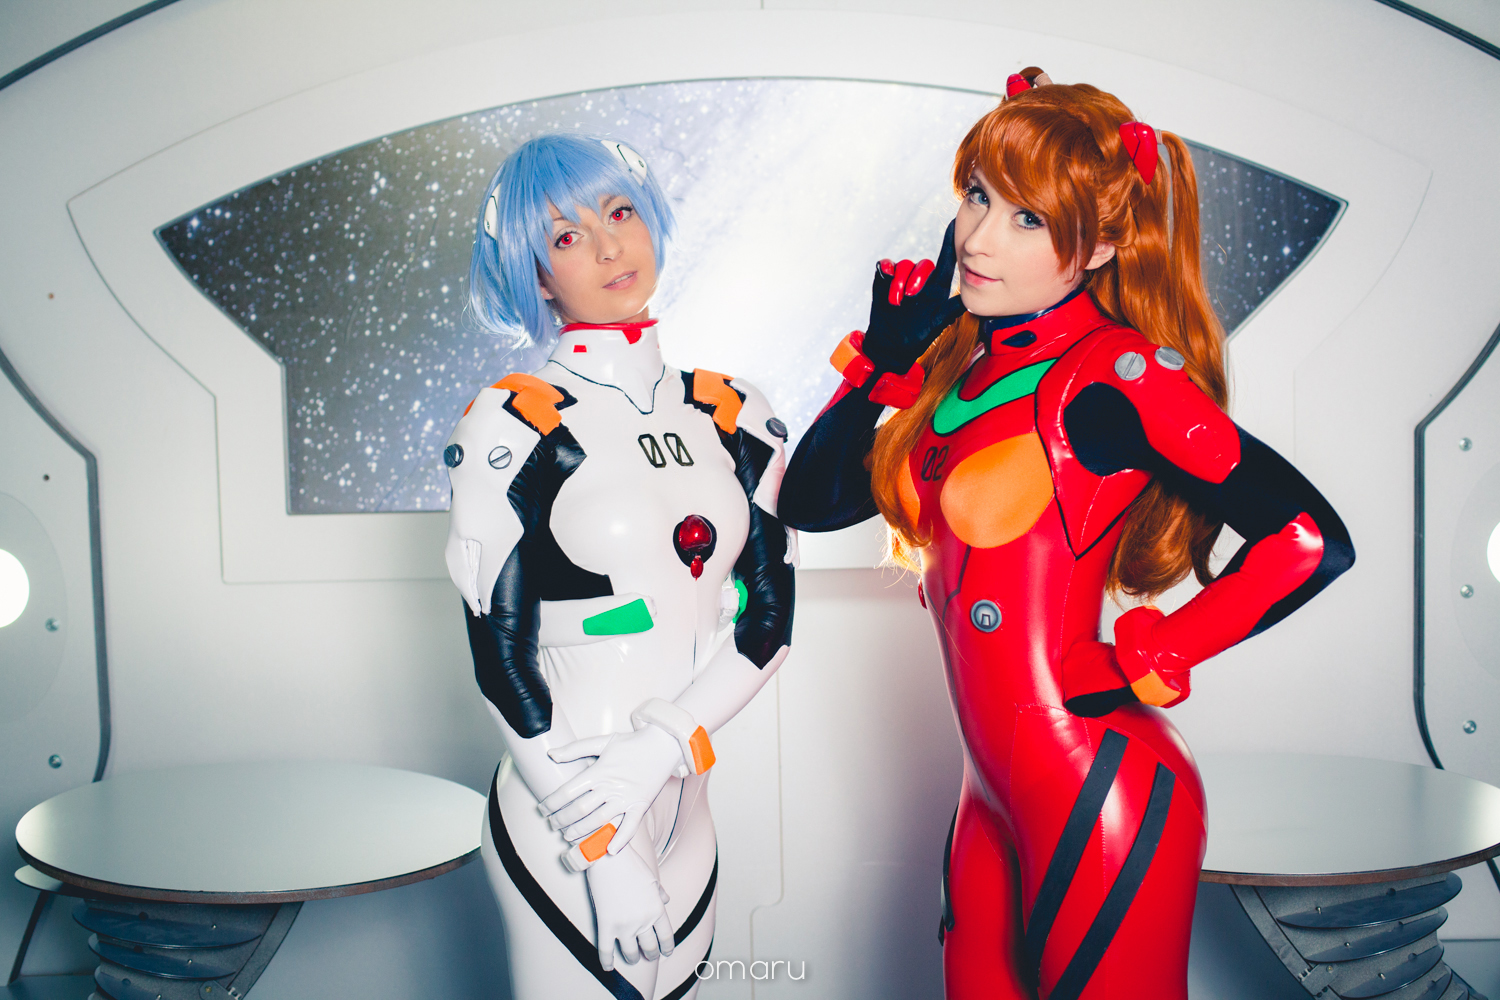 asuka And Rei By nikitacosplay d5r4gsx